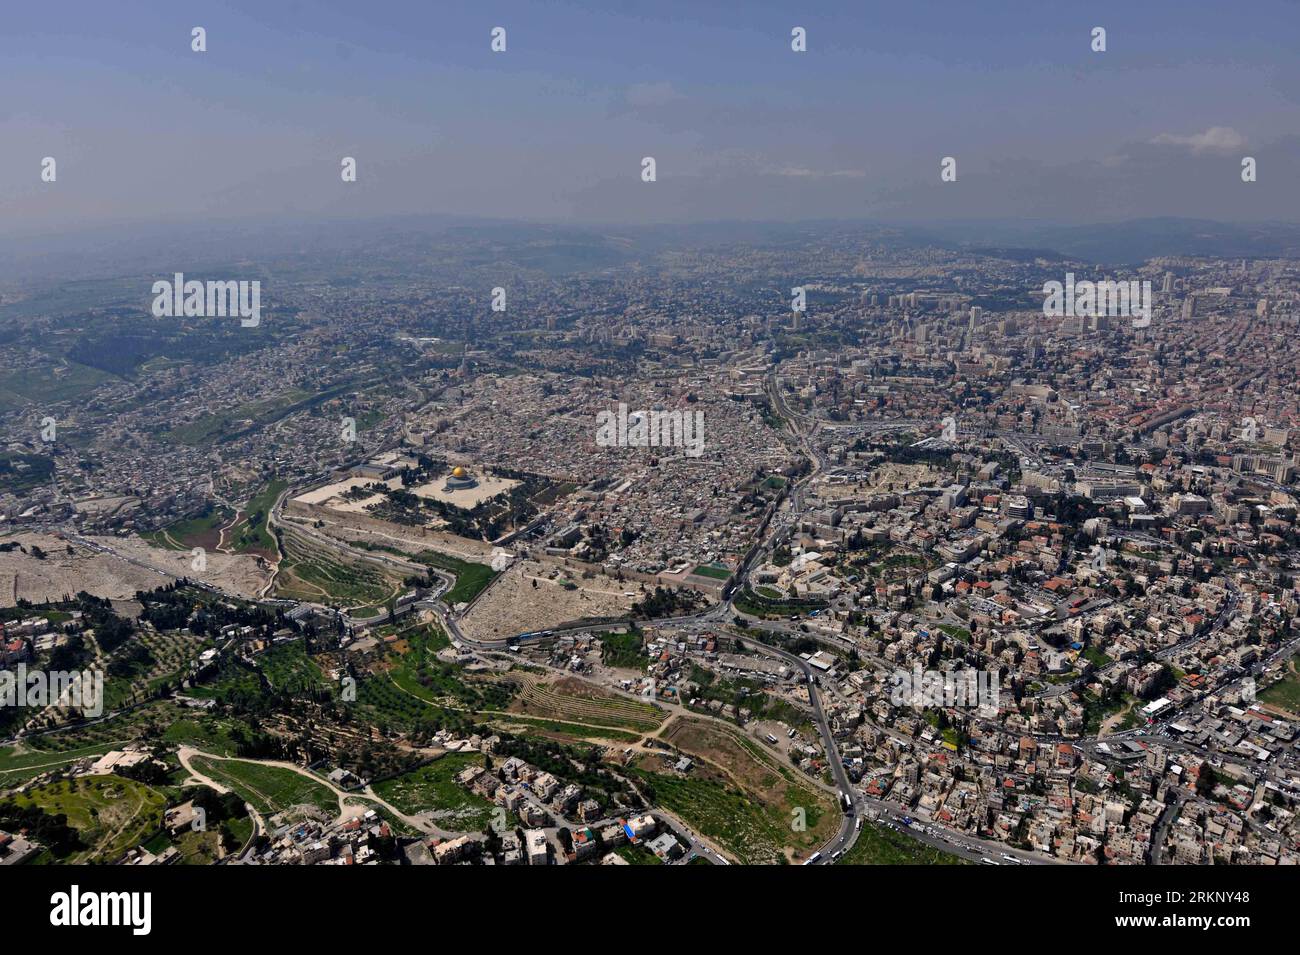 Bildnummer: 57690410  Datum: 27.03.2012  Copyright: imago/Xinhua (120326)-- JERUSALEM, March 26, 2012 (Xinhua) -- Photo taken on March 26, 2012 shows the bird s-eye view of the old city of Jerusalem. Jerusalem is located in the Judean Mountains between the Mediterranean Sea and the northern edge of the Dead Sea. It is a holy city to the three major religions -- Judaism, Christianity and Islam. Today, the status of Jerusalem remains on the core issues in the Israeli-Palestinian conflict. (Xinhua/Yin Dongxun) MIDEAST-JERUSALEM-AERIAL VIEW PUBLICATIONxNOTxINxCHN Gesellschaft Luftaufnahme Totale L Stock Photo